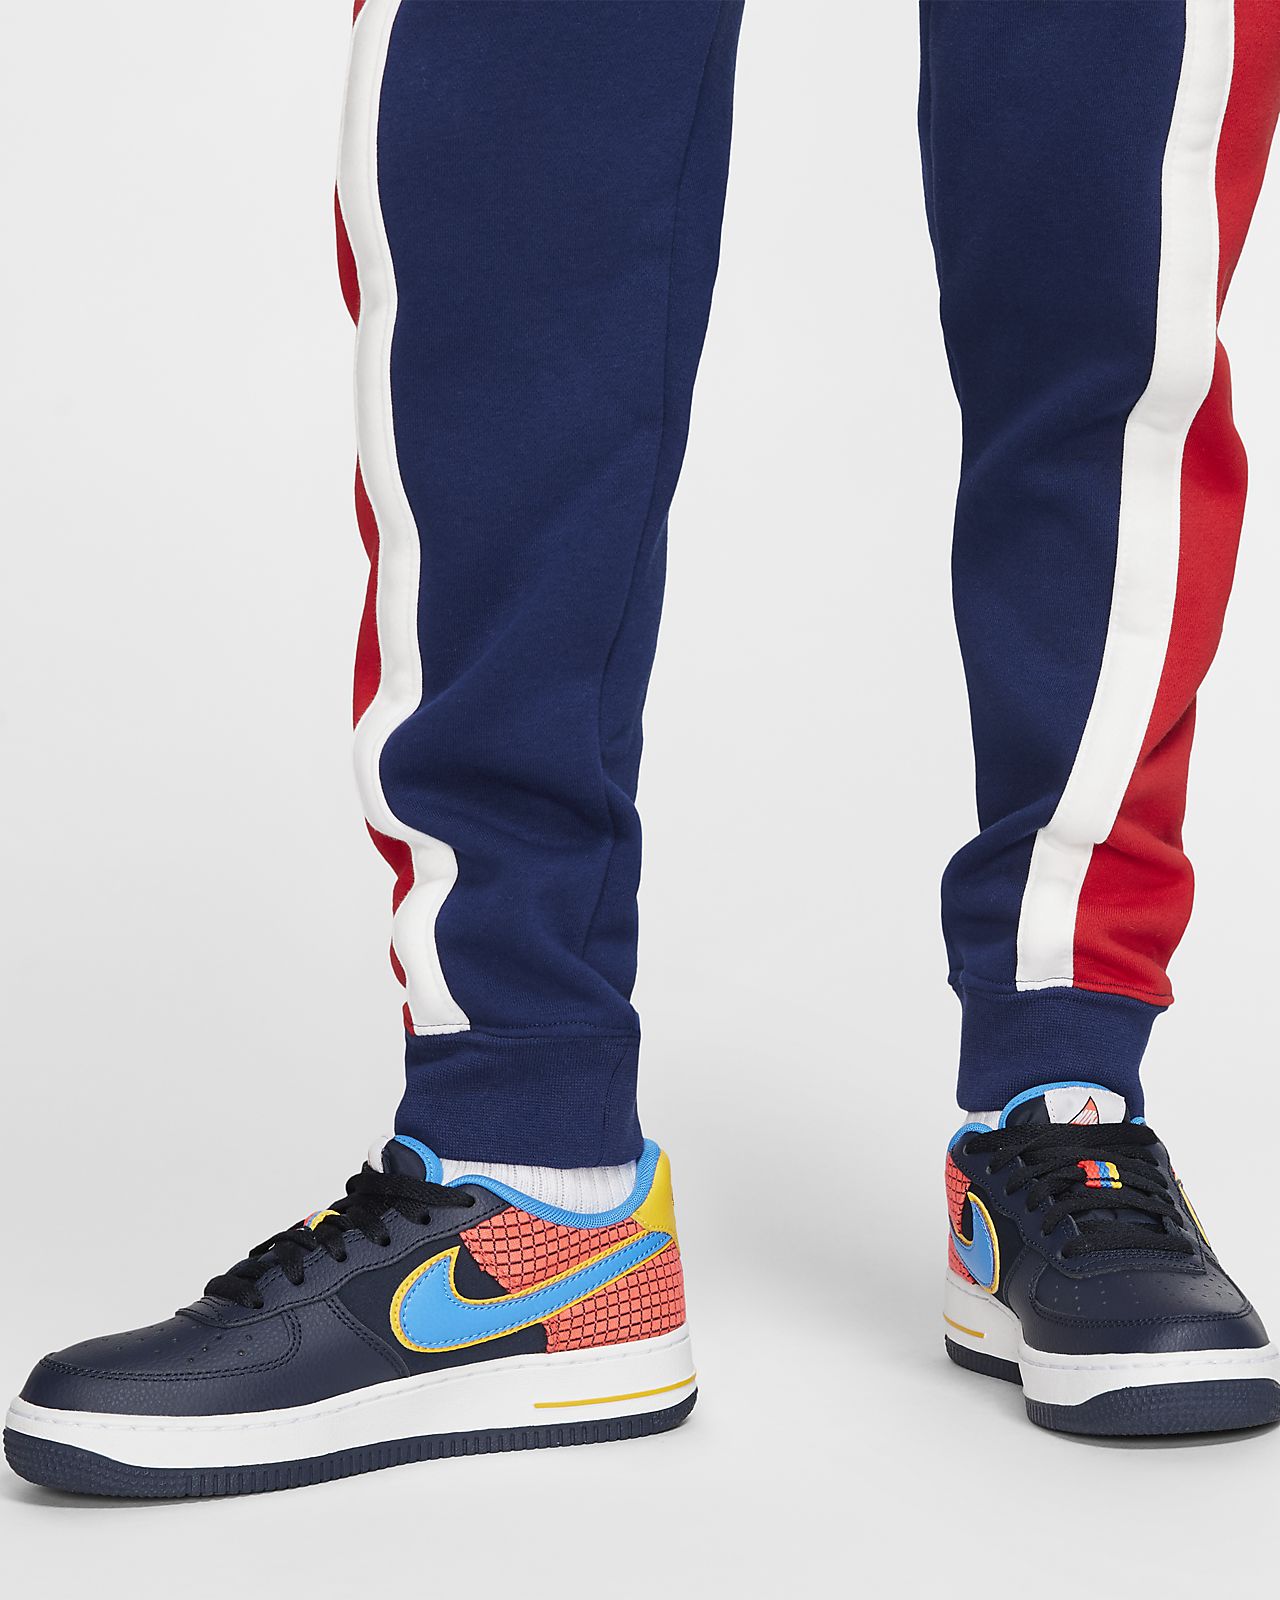 red white and blue nike sweatpants